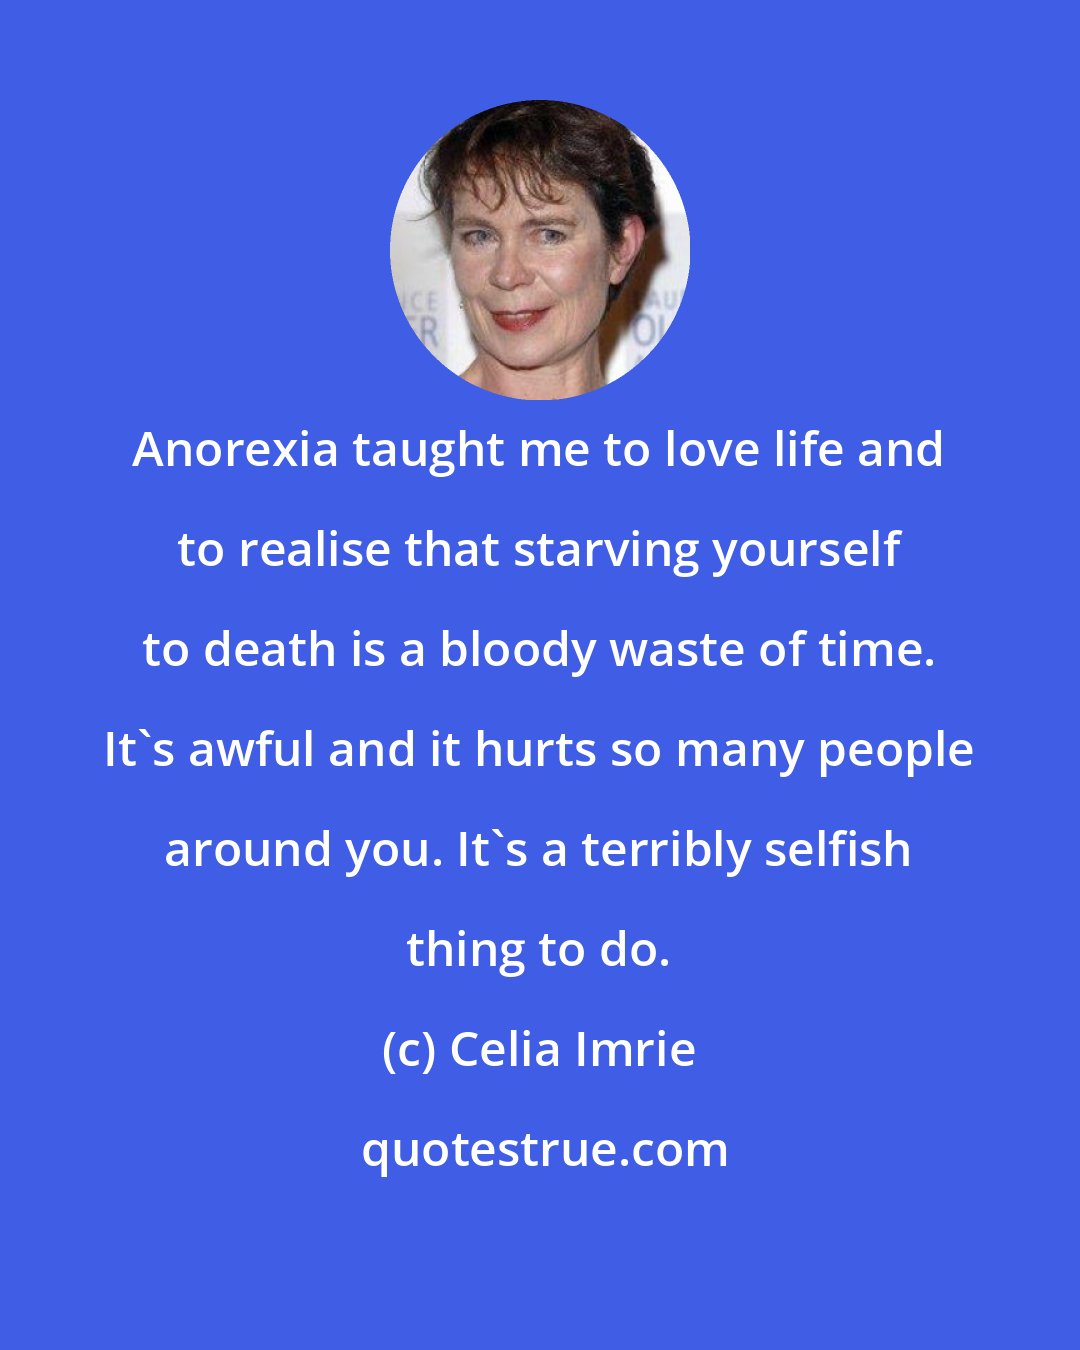 Celia Imrie: Anorexia taught me to love life and to realise that starving yourself to death is a bloody waste of time. It's awful and it hurts so many people around you. It's a terribly selfish thing to do.